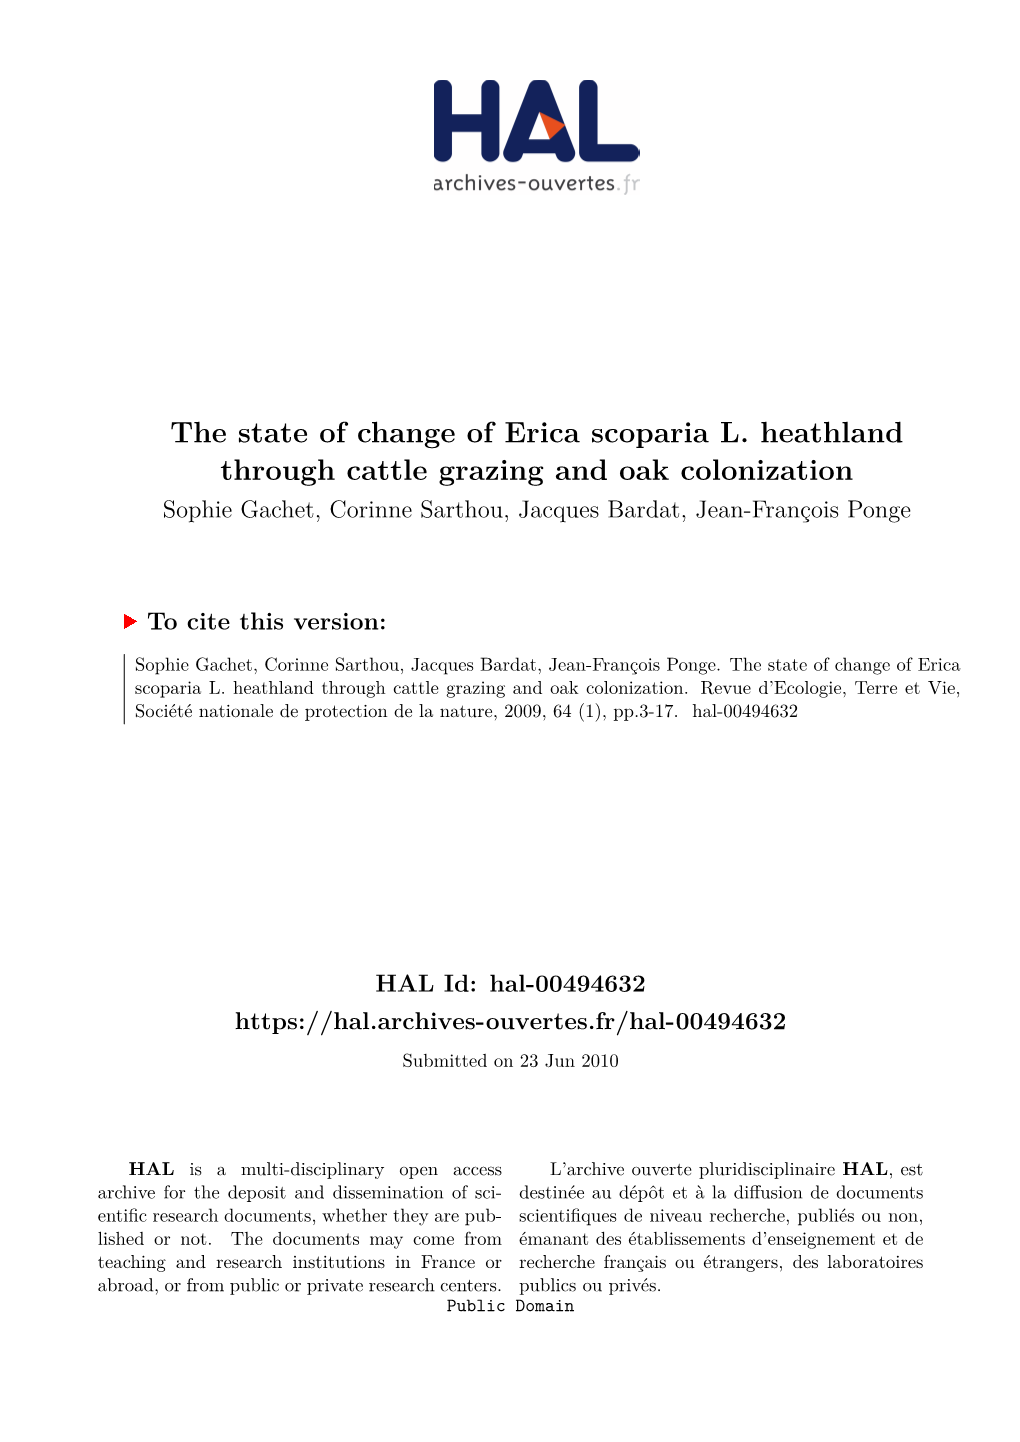 The State of Change of Erica Scoparia L. Heathland Through Cattle Grazing and Oak Colonization Sophie Gachet, Corinne Sarthou, Jacques Bardat, Jean-François Ponge